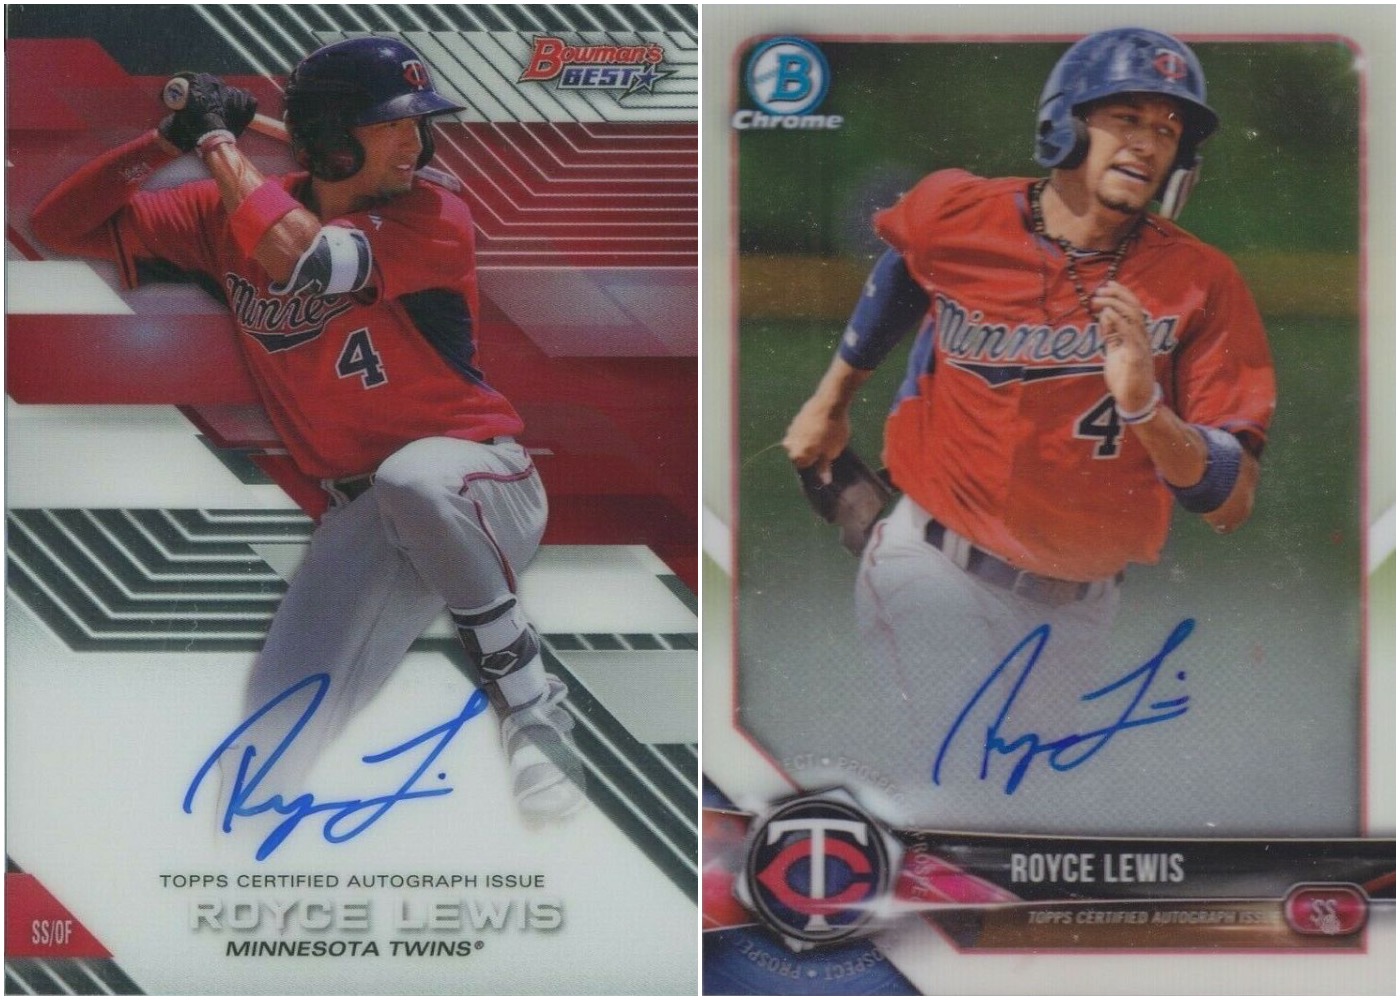 Royce Lewis, Minnesot Twins, sports cards